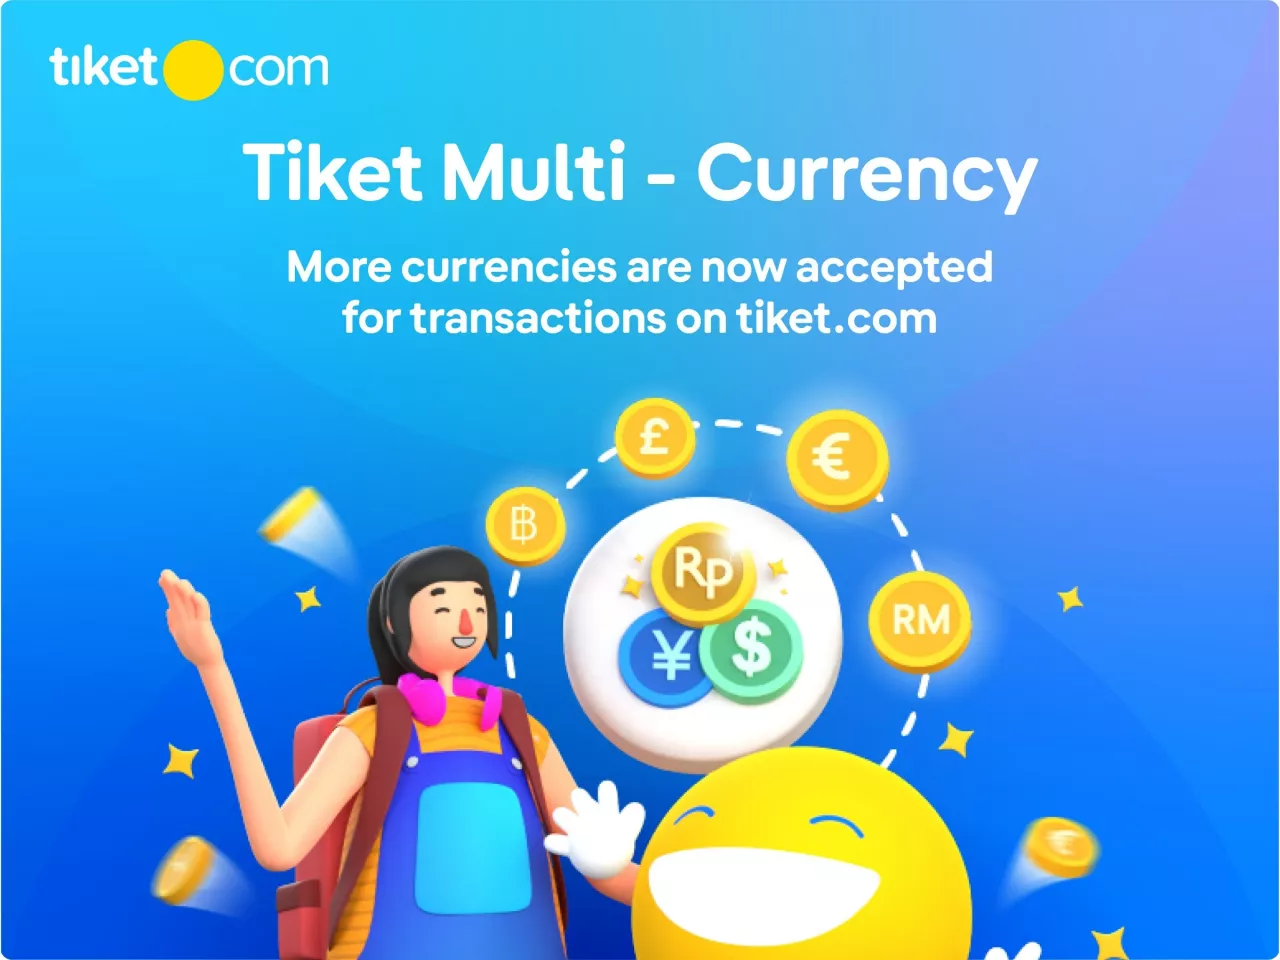 tiket.com Launches Tiket Multi-Currency to Further Boost International Transactions